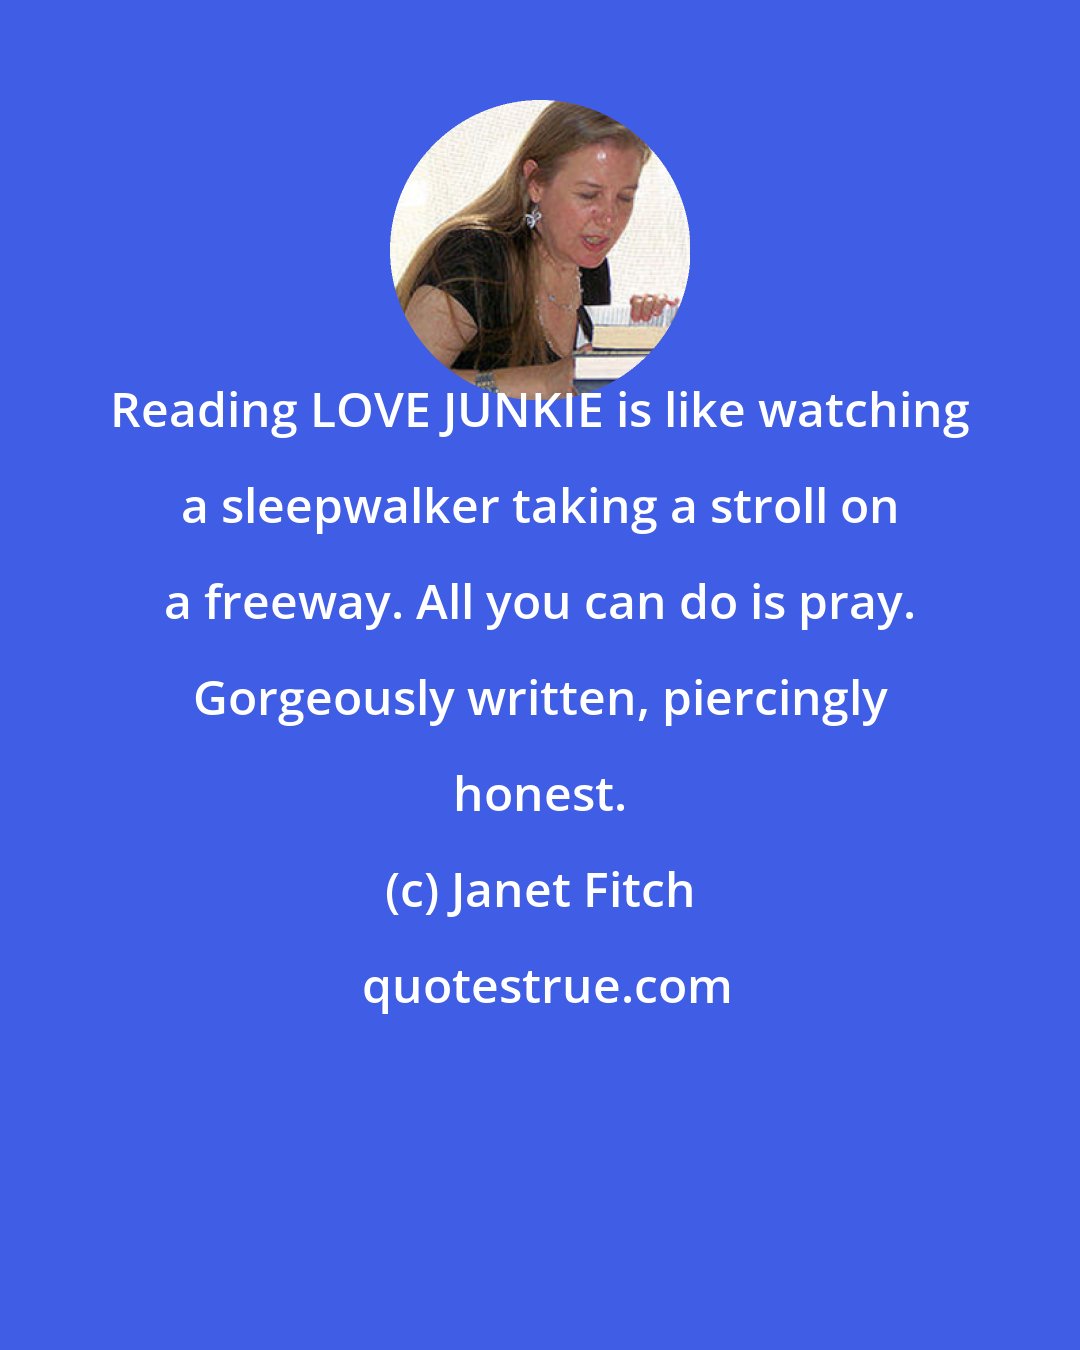 Janet Fitch: Reading LOVE JUNKIE is like watching a sleepwalker taking a stroll on a freeway. All you can do is pray. Gorgeously written, piercingly honest.